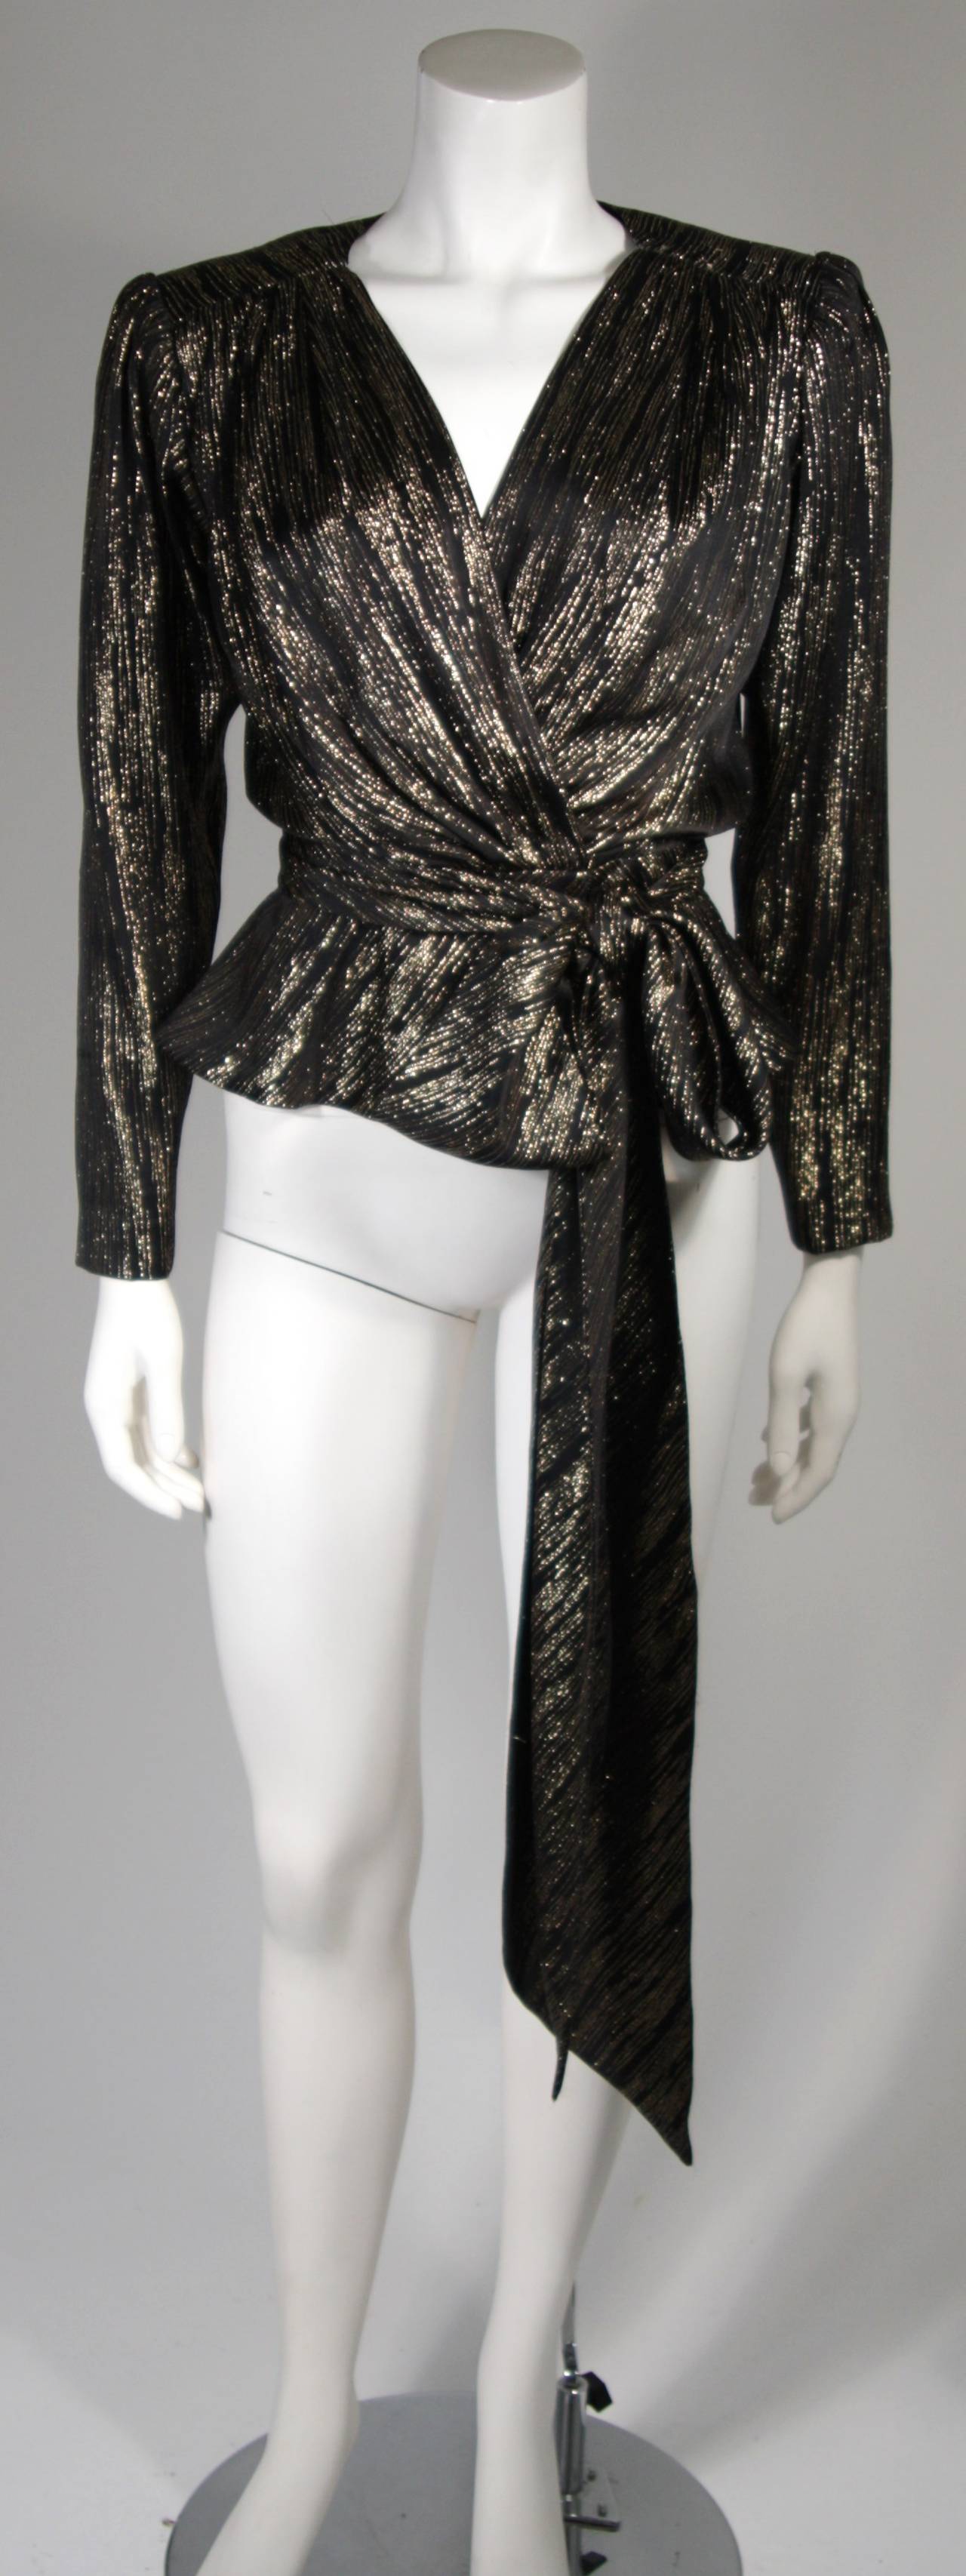 Nolan Miller Attributed Black and Gold Lame Ensemble Size Small 3